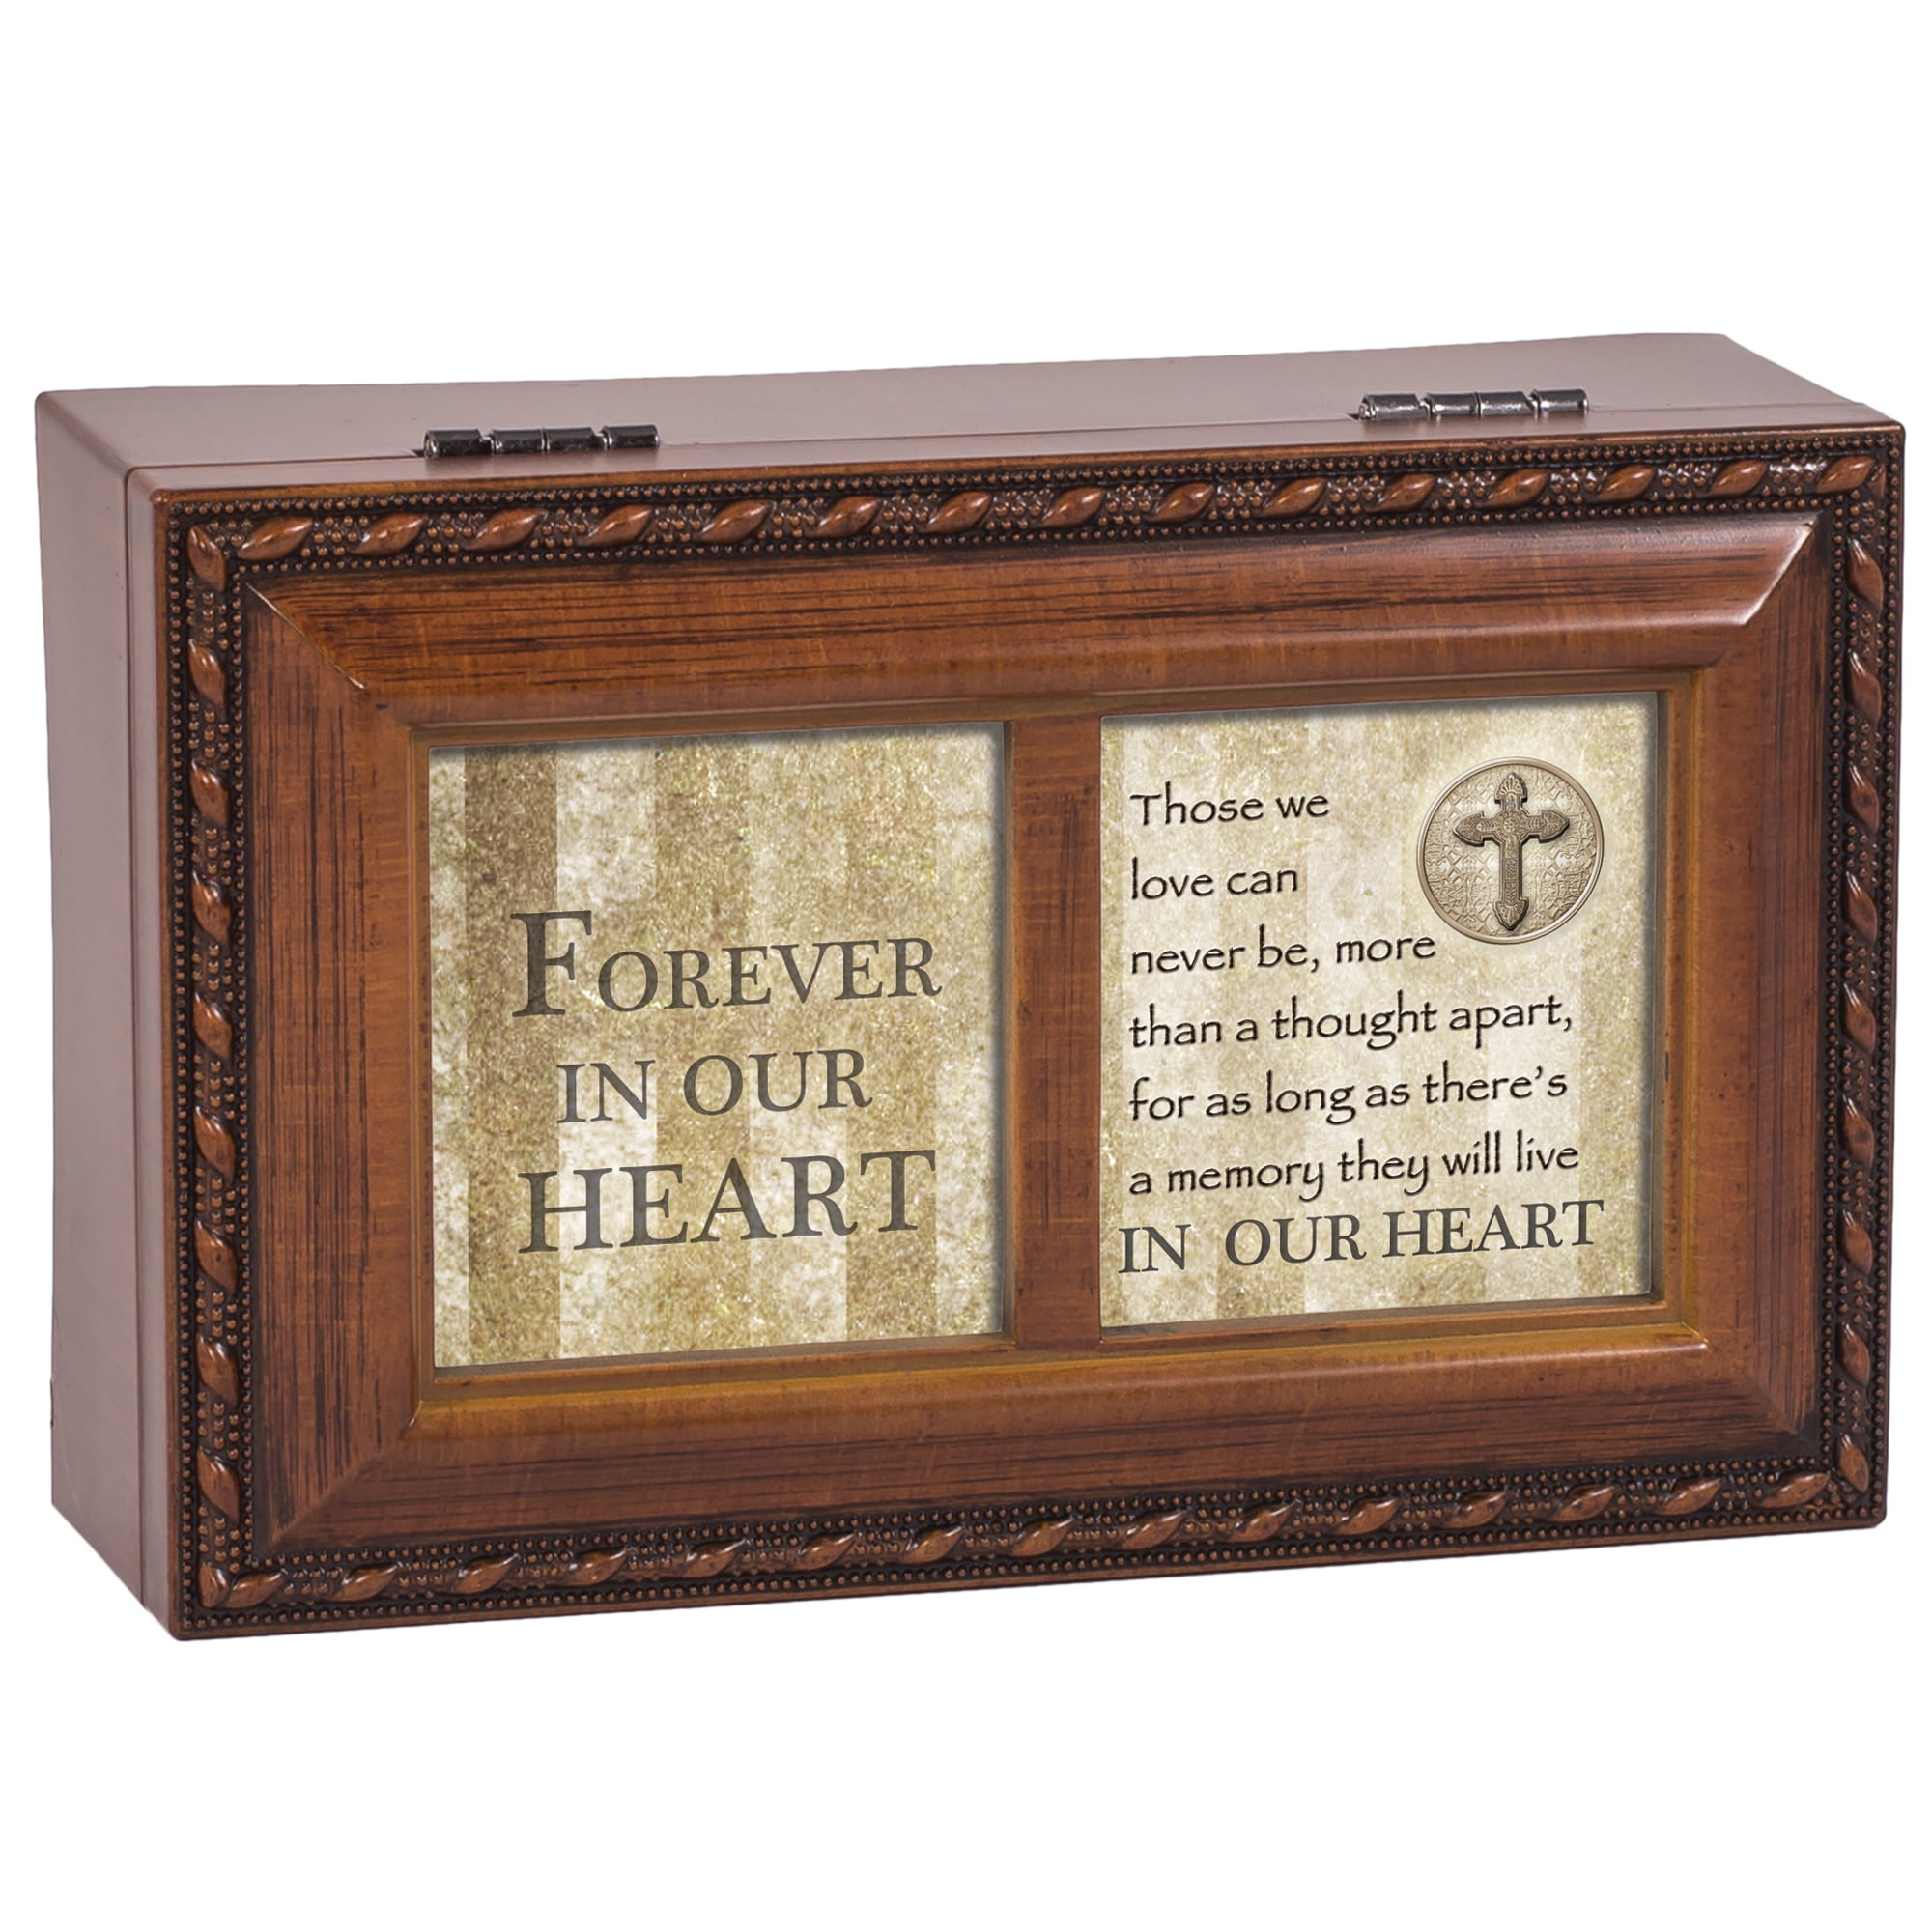 May You Find The Courage Jeweled Woodgrain Jewelry Music Box 